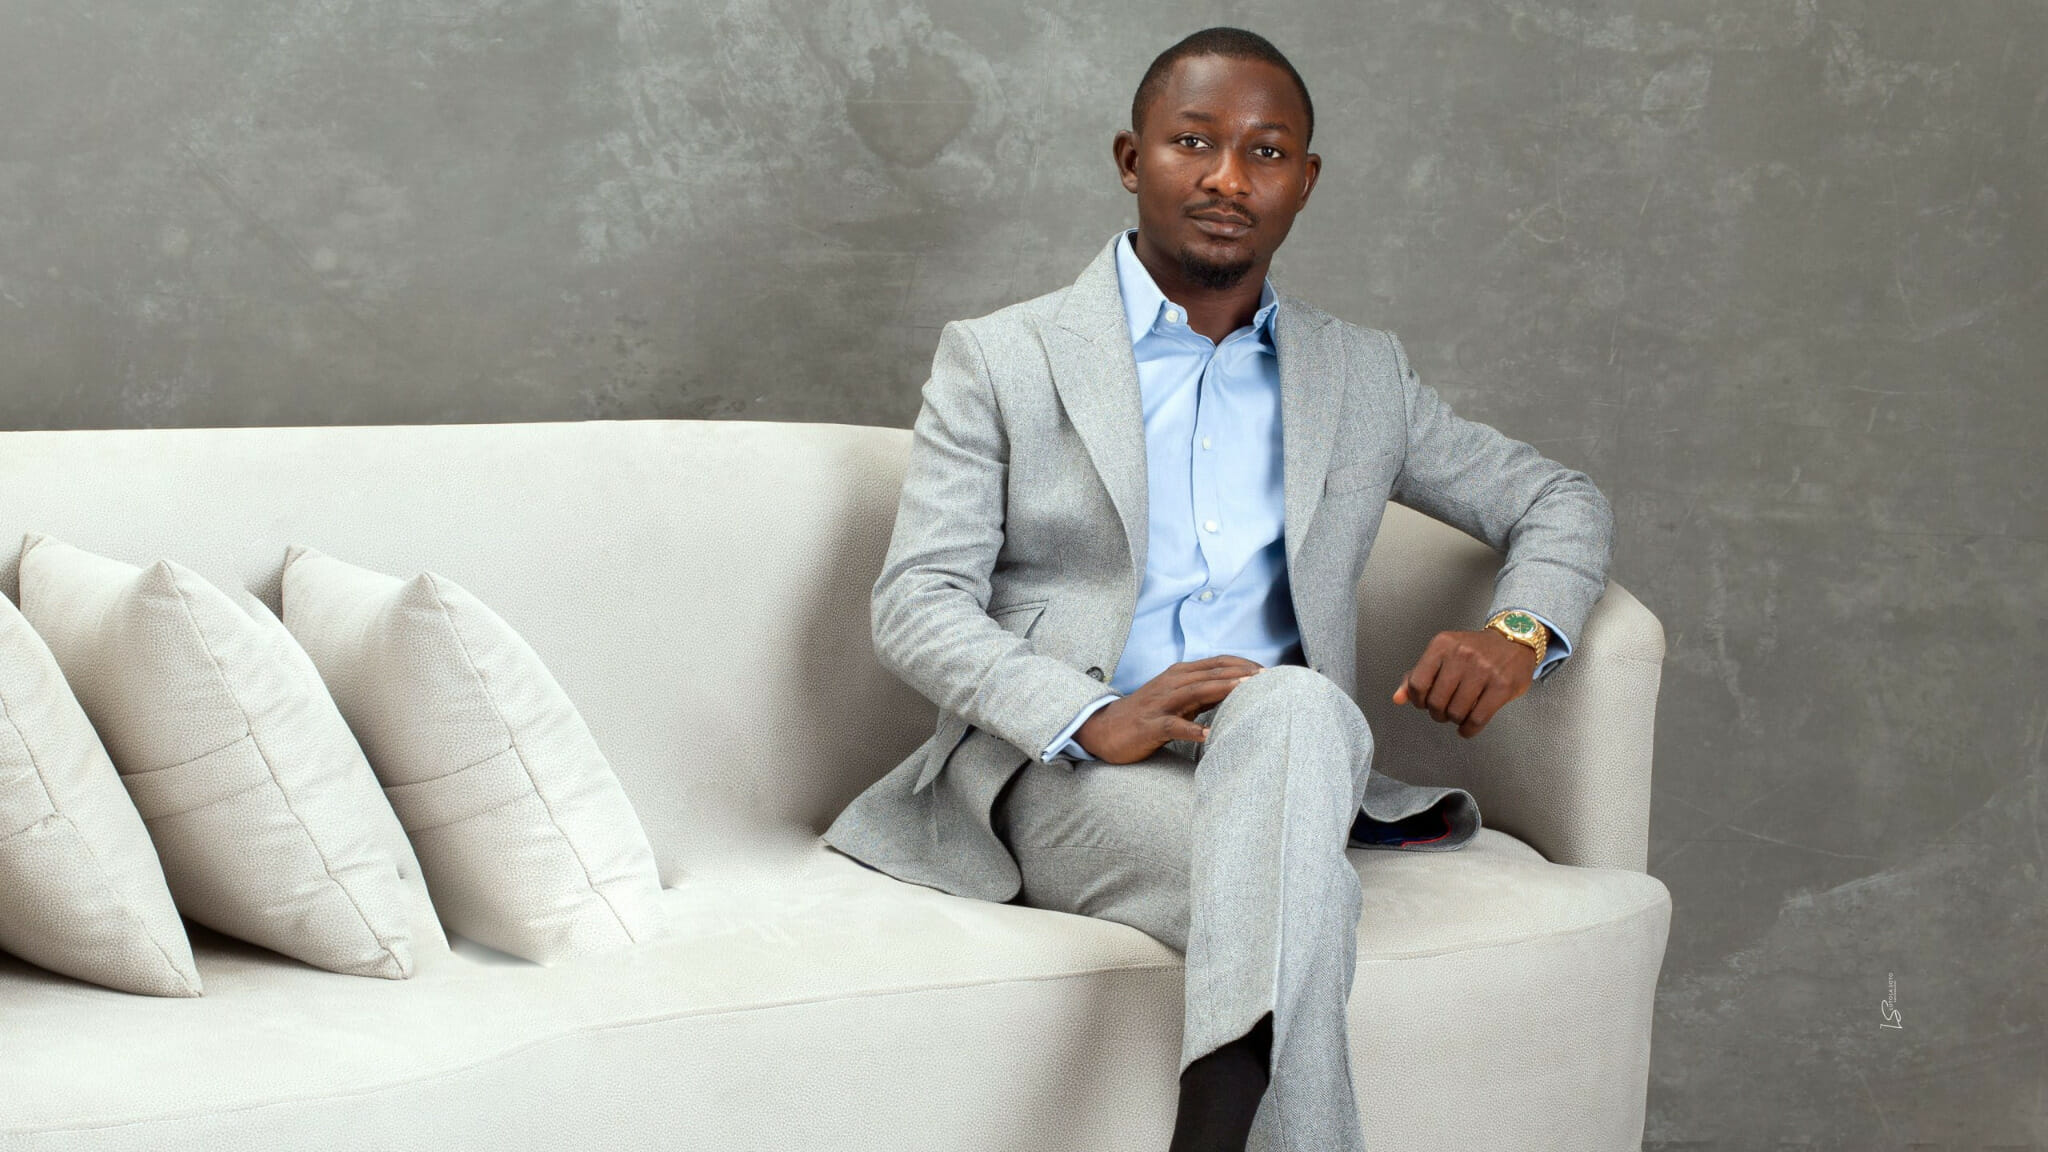 Meet 7 Most Popular and Influential Young Real Estate CEOs in Nigeria